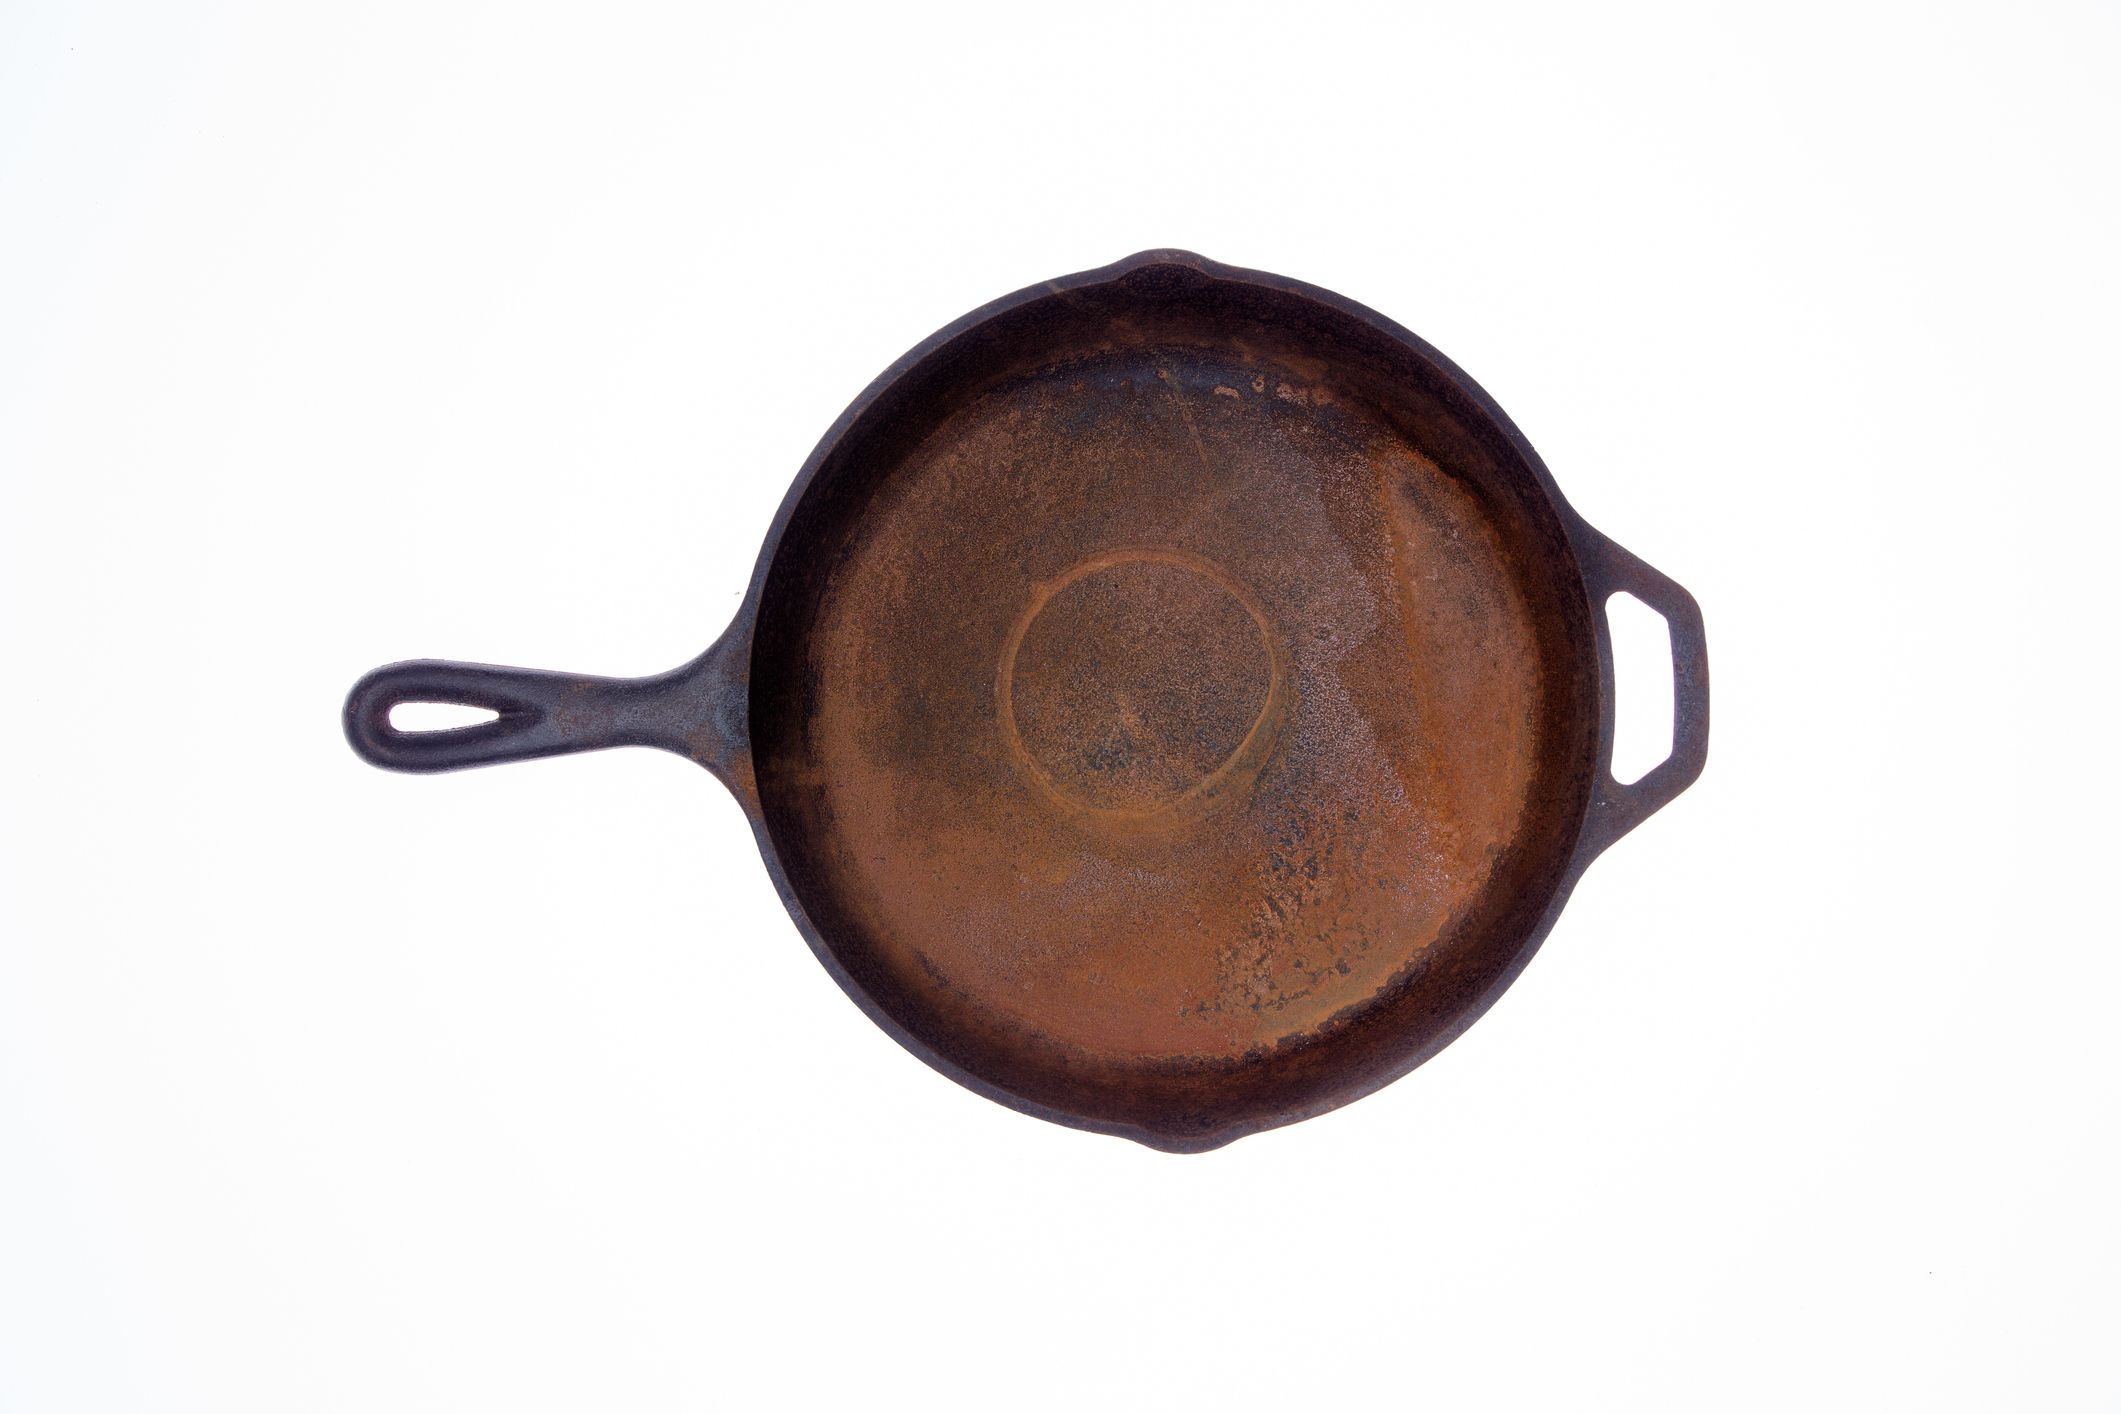 https://hips.hearstapps.com/hmg-prod/images/old-rusty-round-cast-iron-frying-pan-royalty-free-image-1684529860.jpg